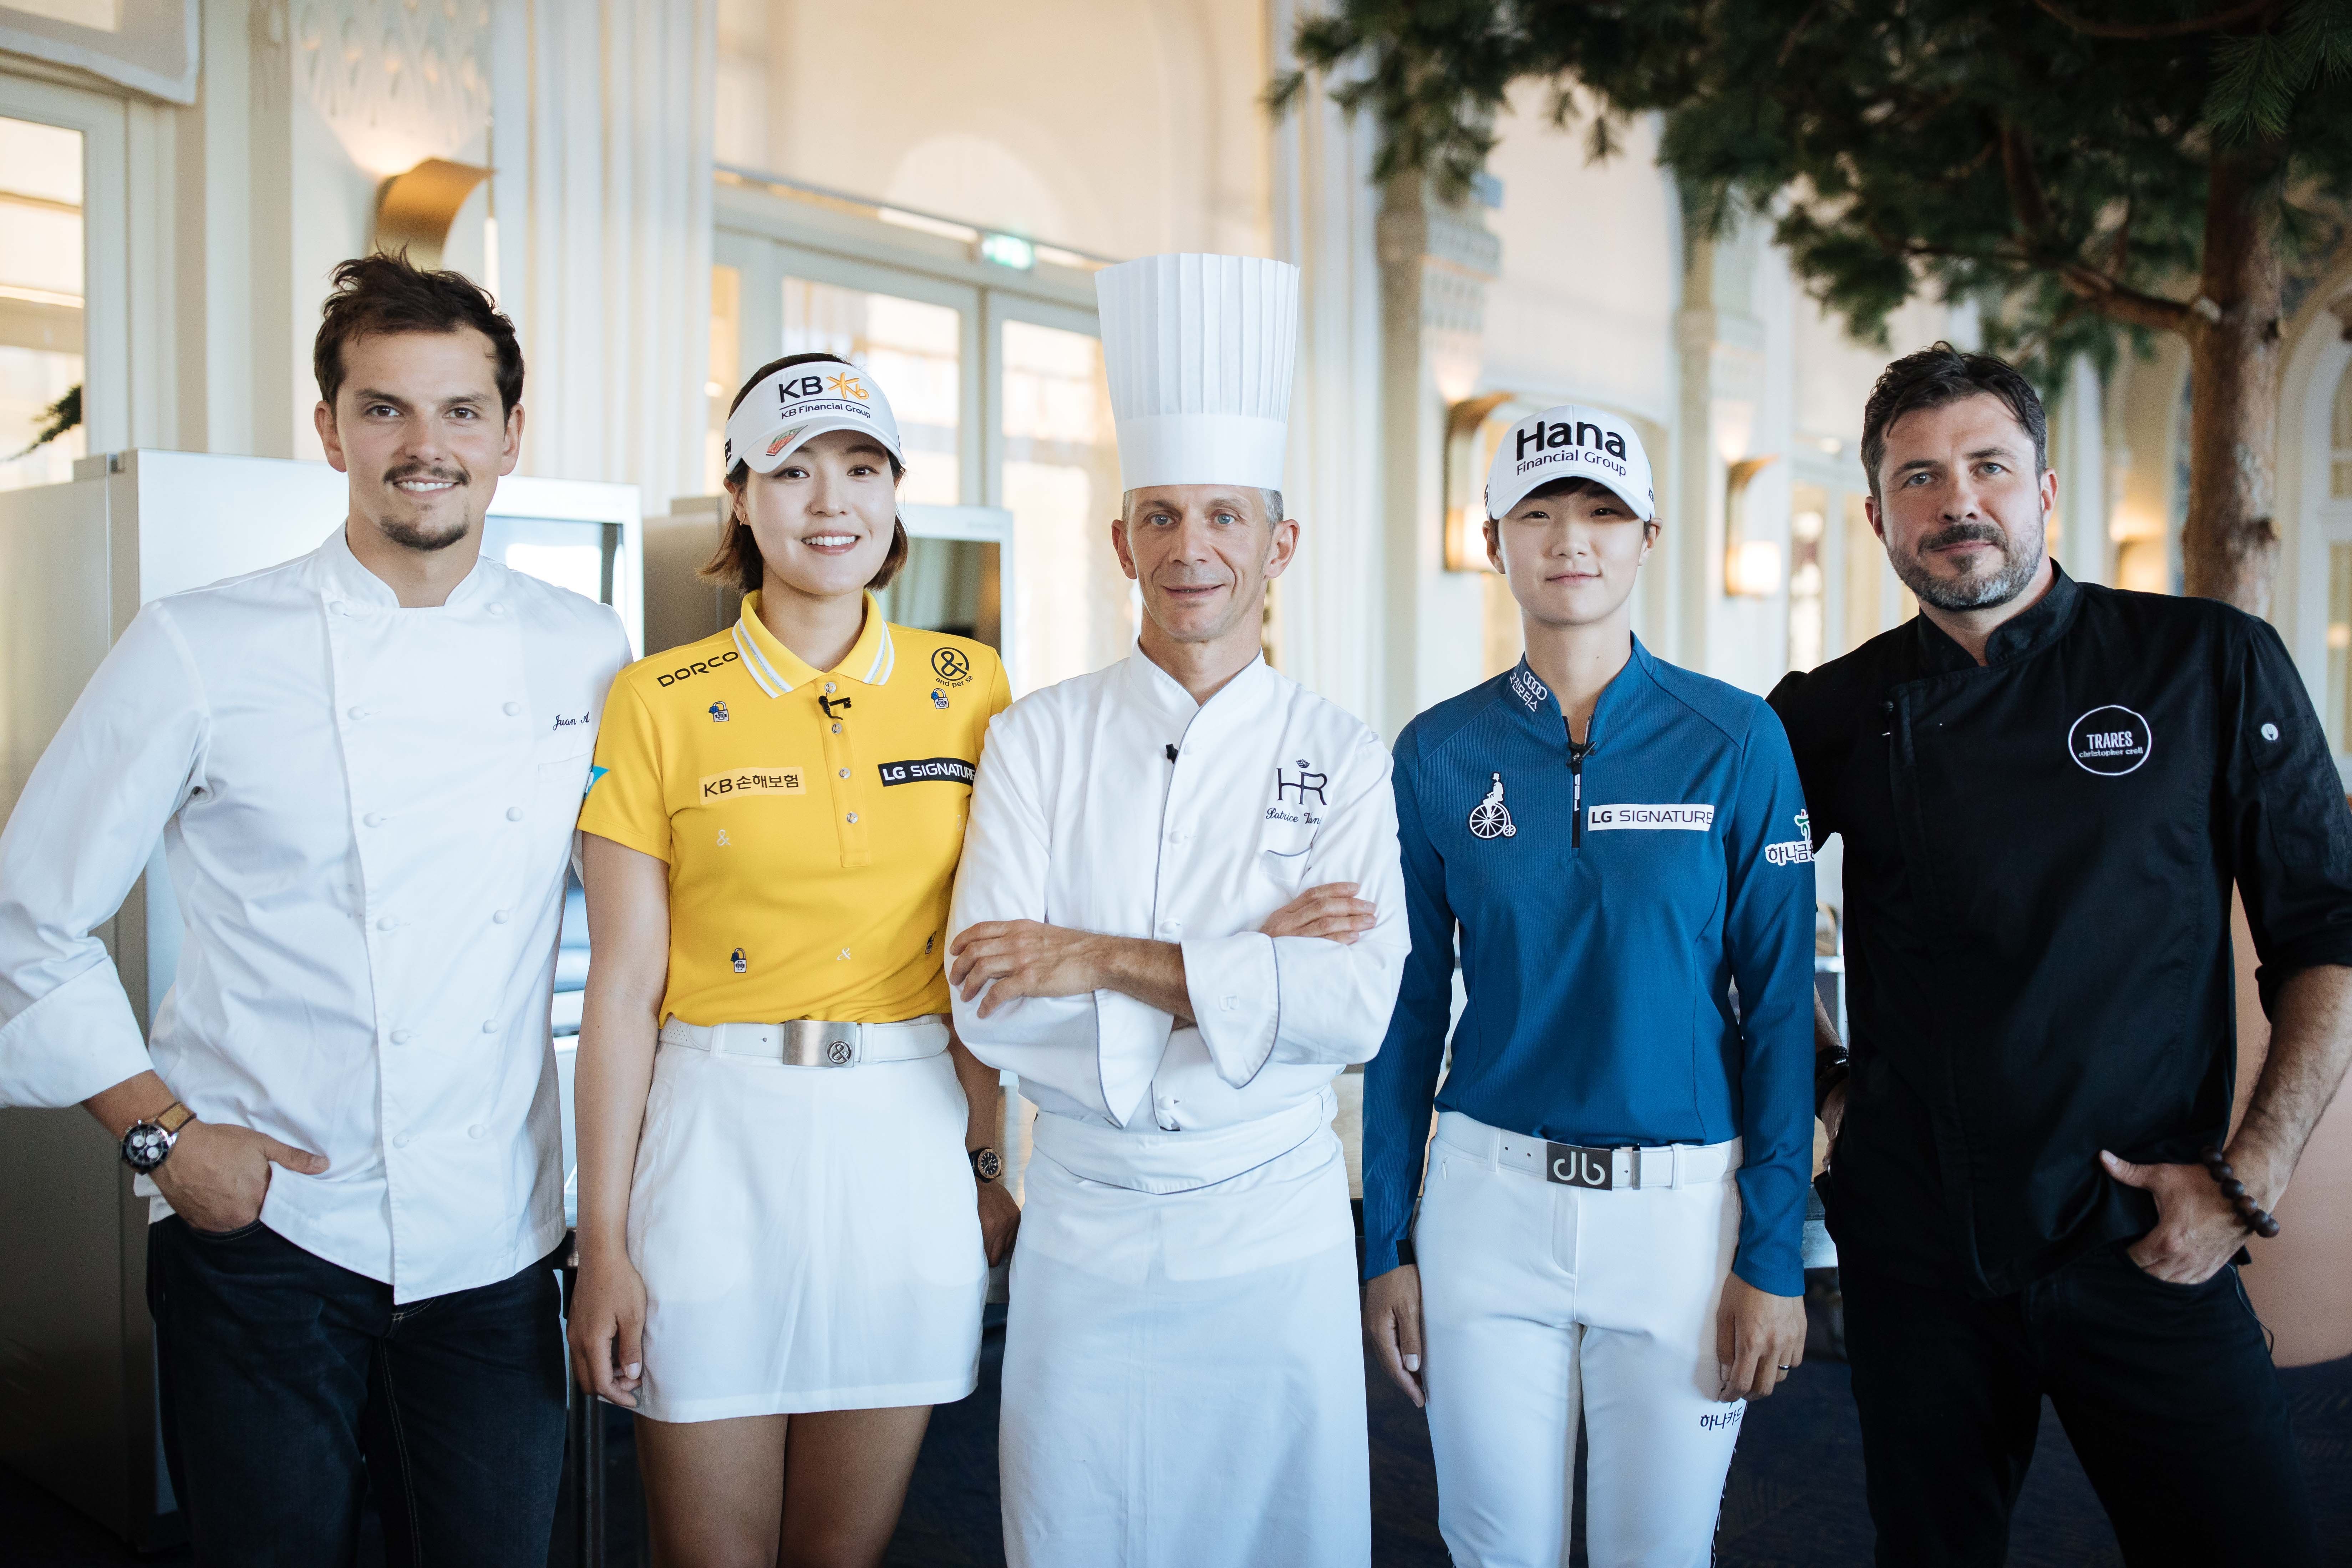 A group photo of star chefs Patrice Vander, Juan Arbelaez and Christopher Crell, and golfers Park Sung-hyun and Chun In-gee